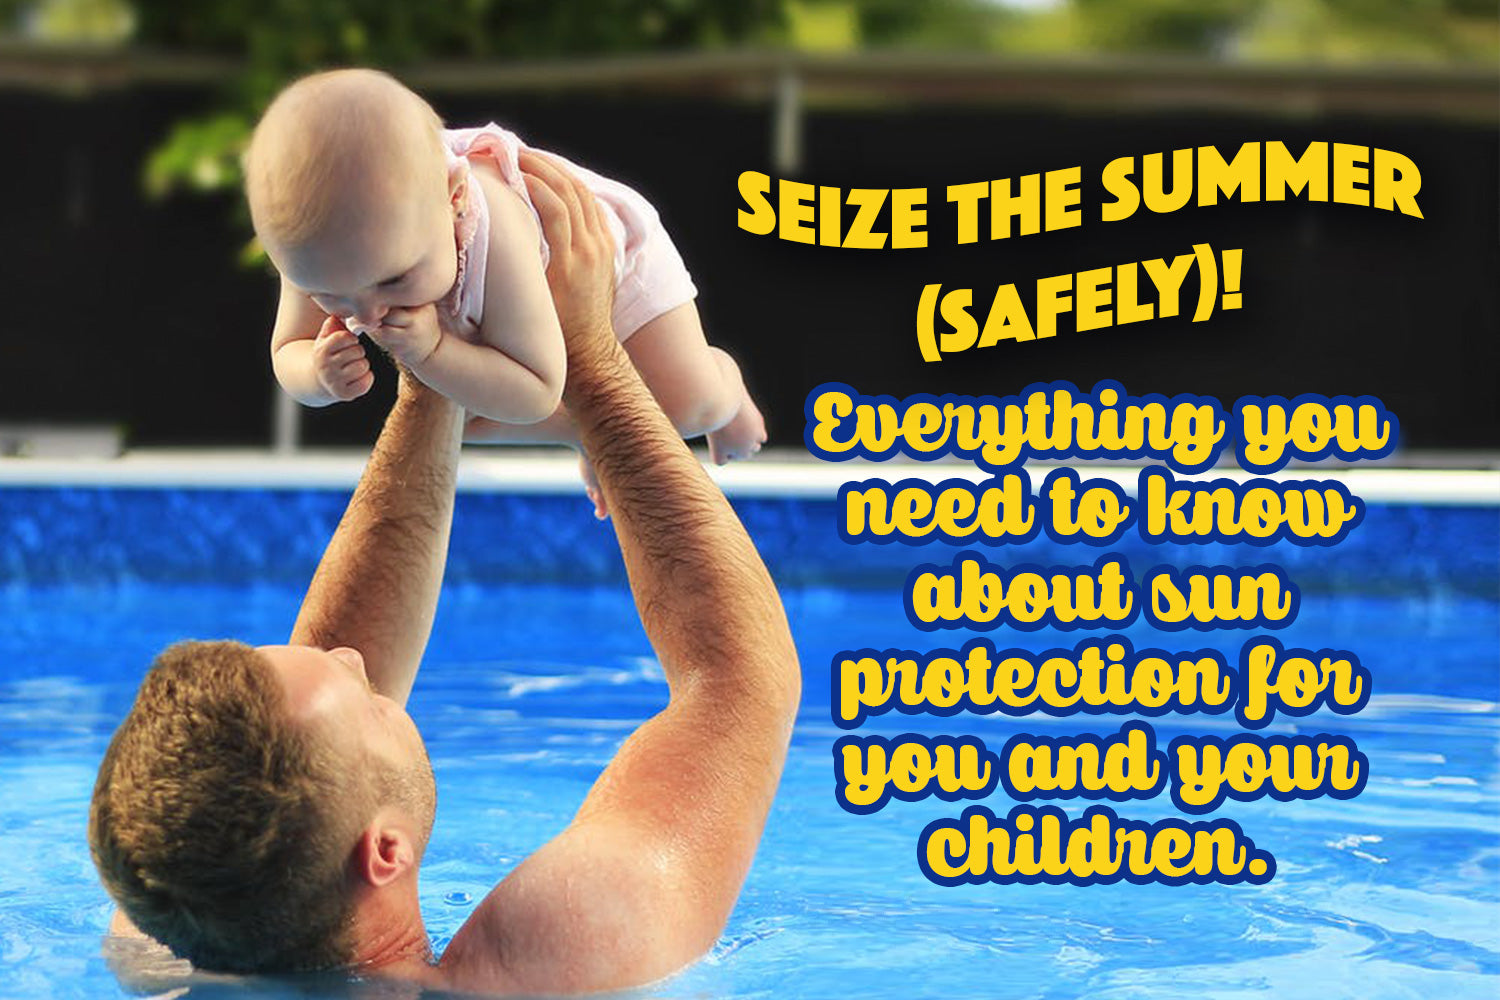 Sun safety tips for parents